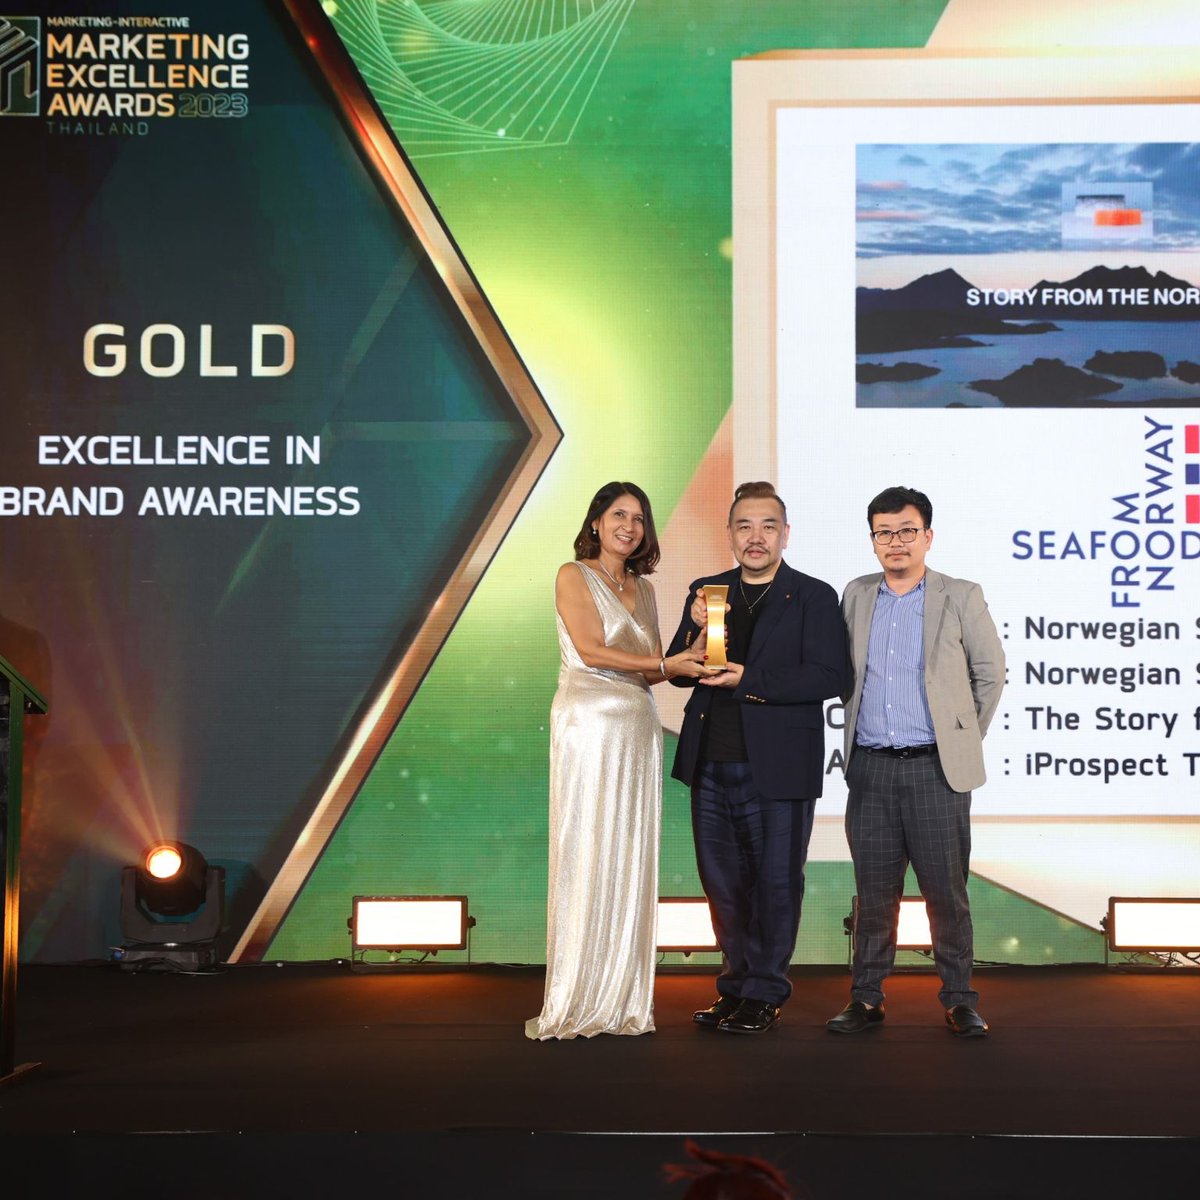 Proud to share the incredible 13 accolades iProspect Thailand received at the Marketing Excellence Awards Thailand 2023 🏆👏These awards recognize our deep commitment to pioneering media strategies and our innovative use of digital technology and platforms.